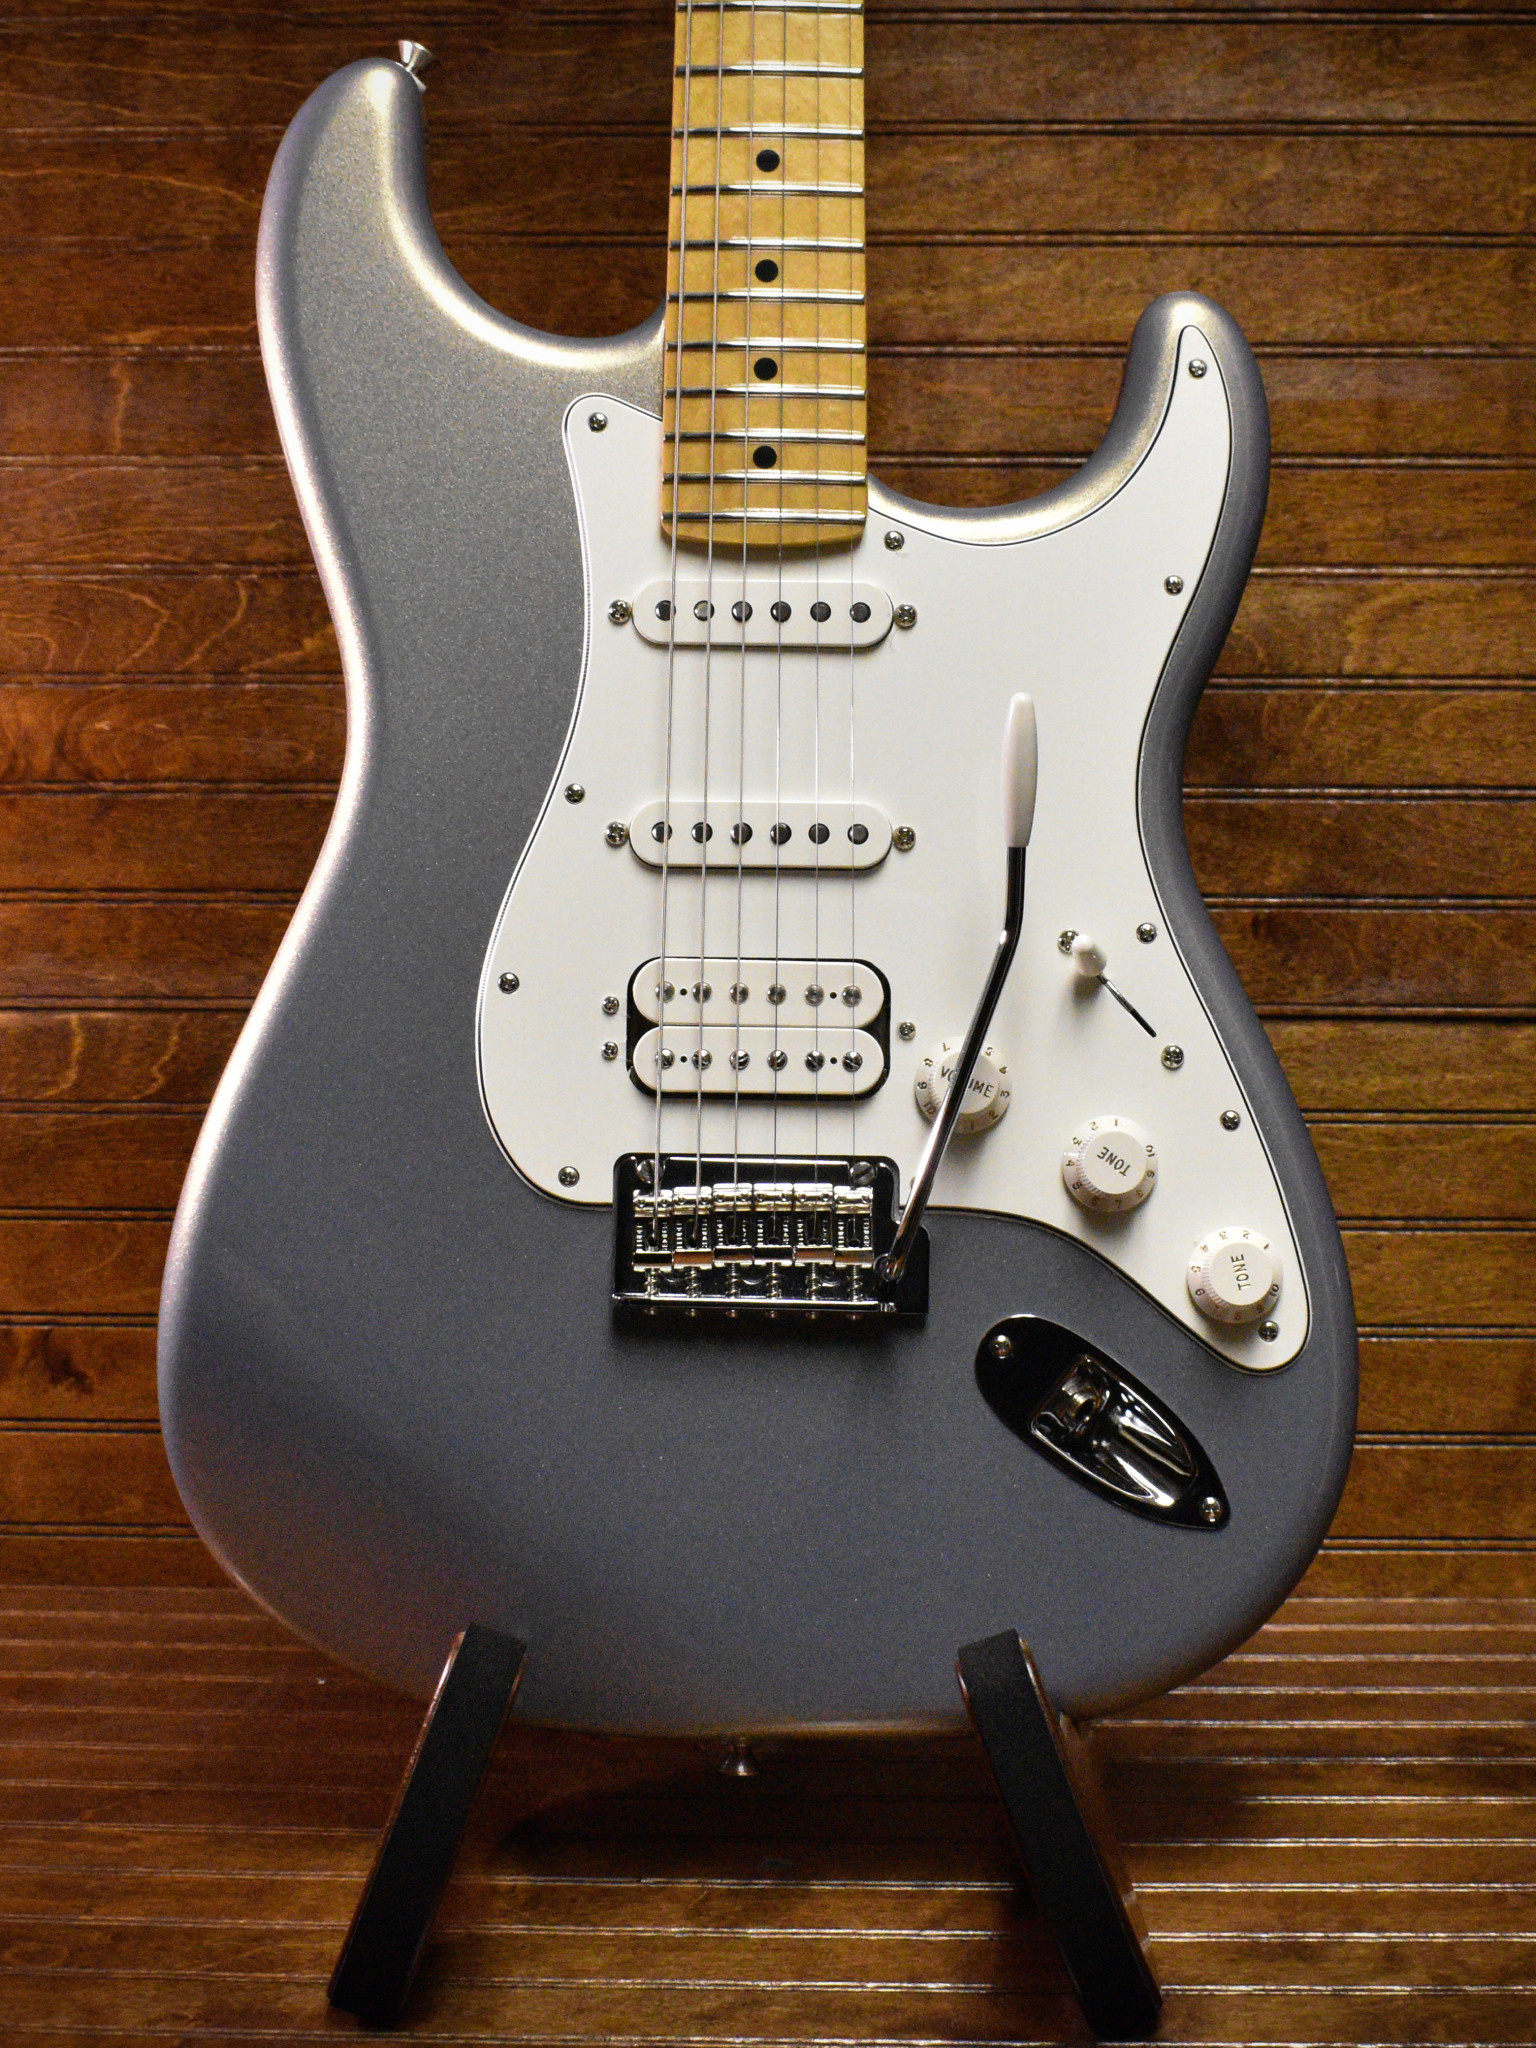 2019 Fender Player Stratocaster HSS Silver - Newell's Music